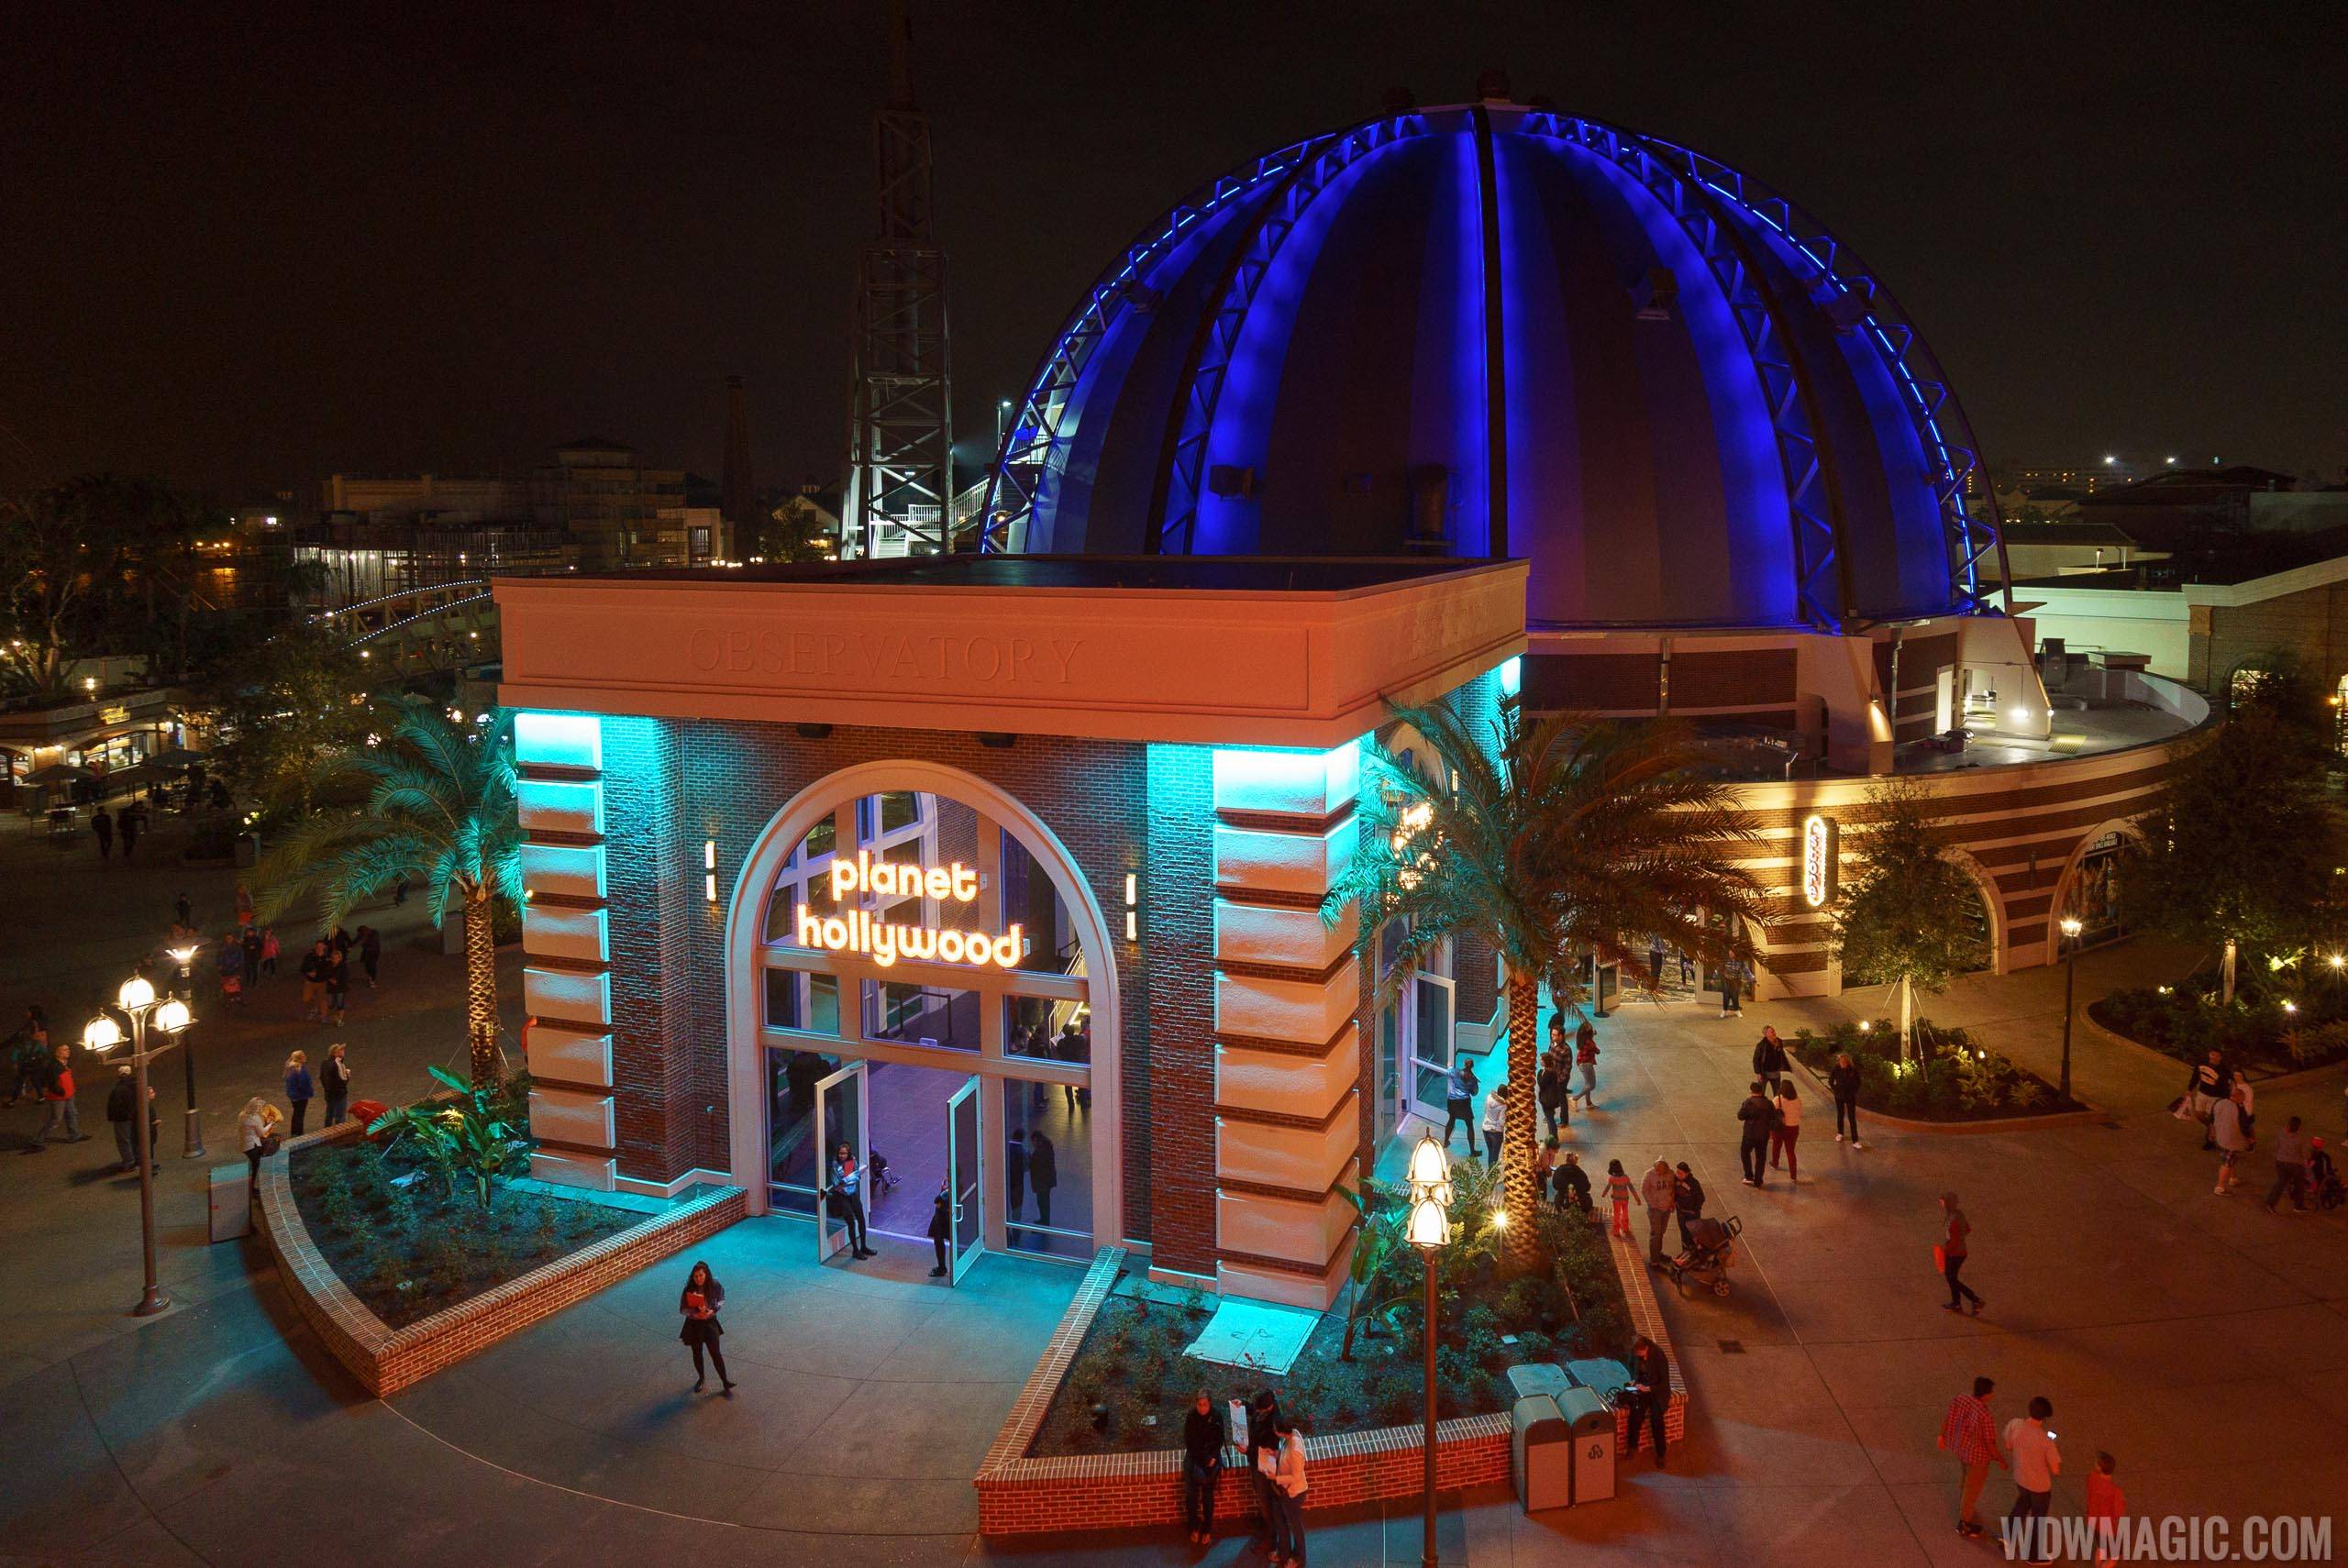 Planet Hollywood to close soon as it transforms into the Observatory